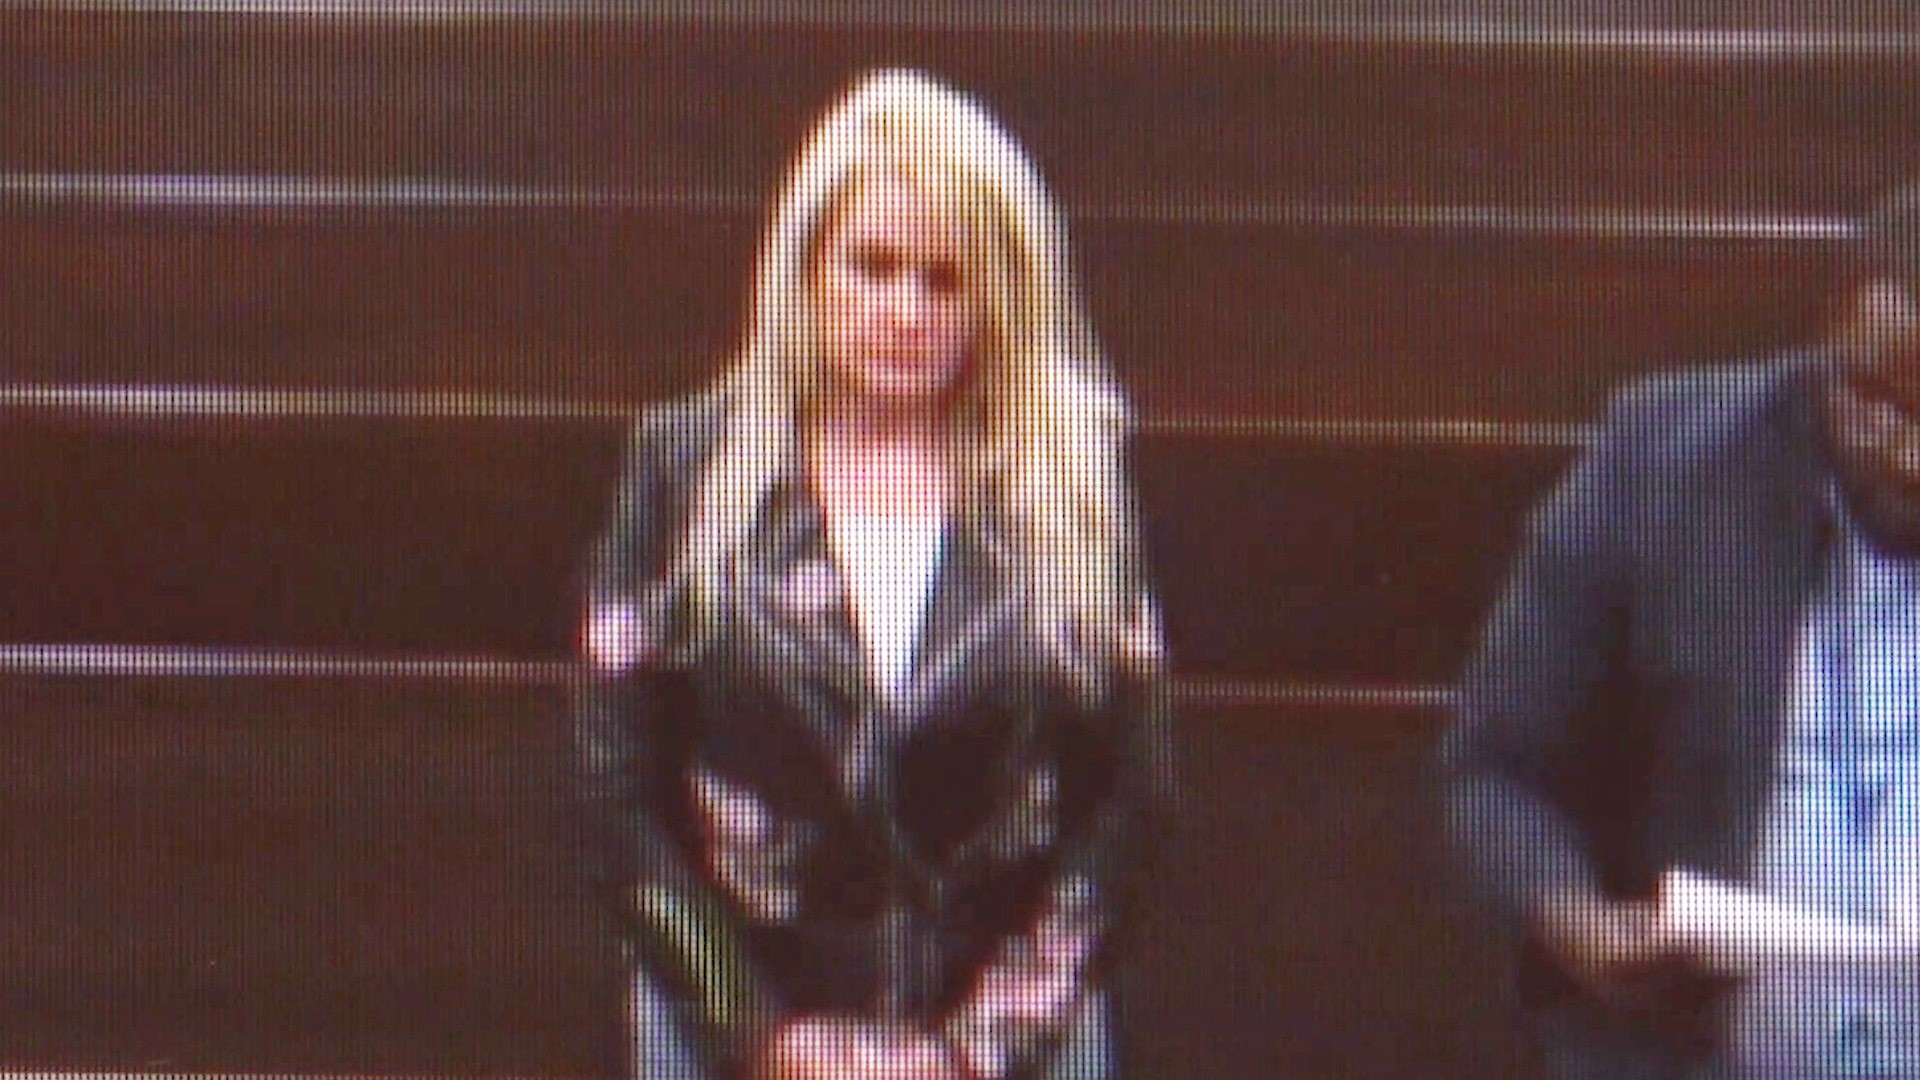 Raw video from Carolyn Court's appearance in Harris County probable cause court on Jan. 20, 2020. She's accused of fatally shooting Ray Court at her home.